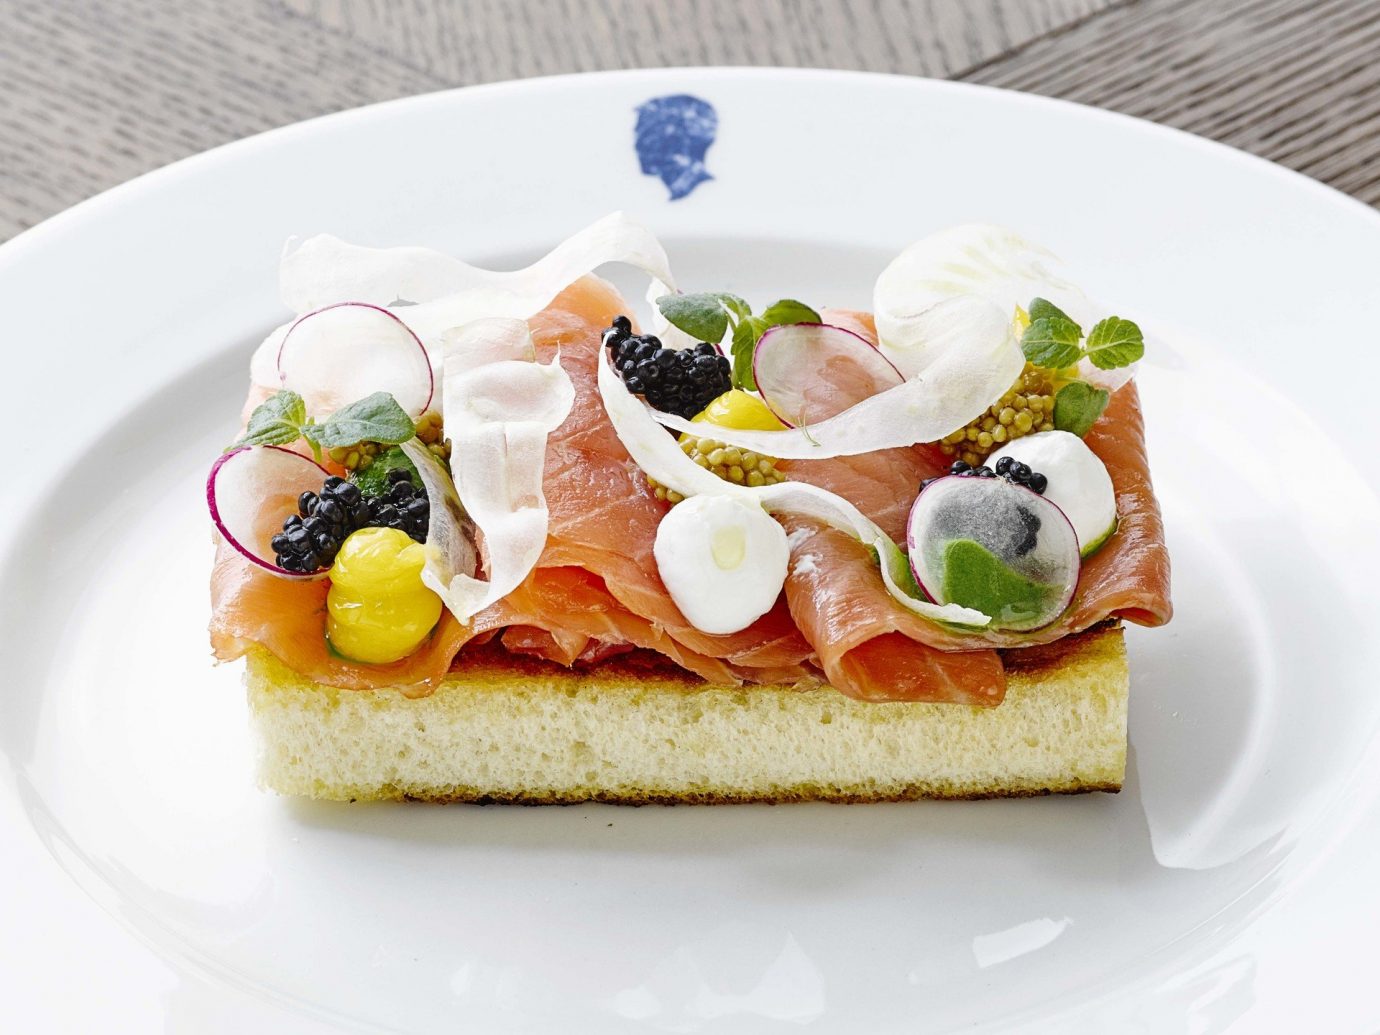 Hotels Travel Tips plate food table dish meal breakfast slice smoked salmon cuisine white canapé bruschetta produce hors d oeuvre toast prosciutto sliced dessert arranged